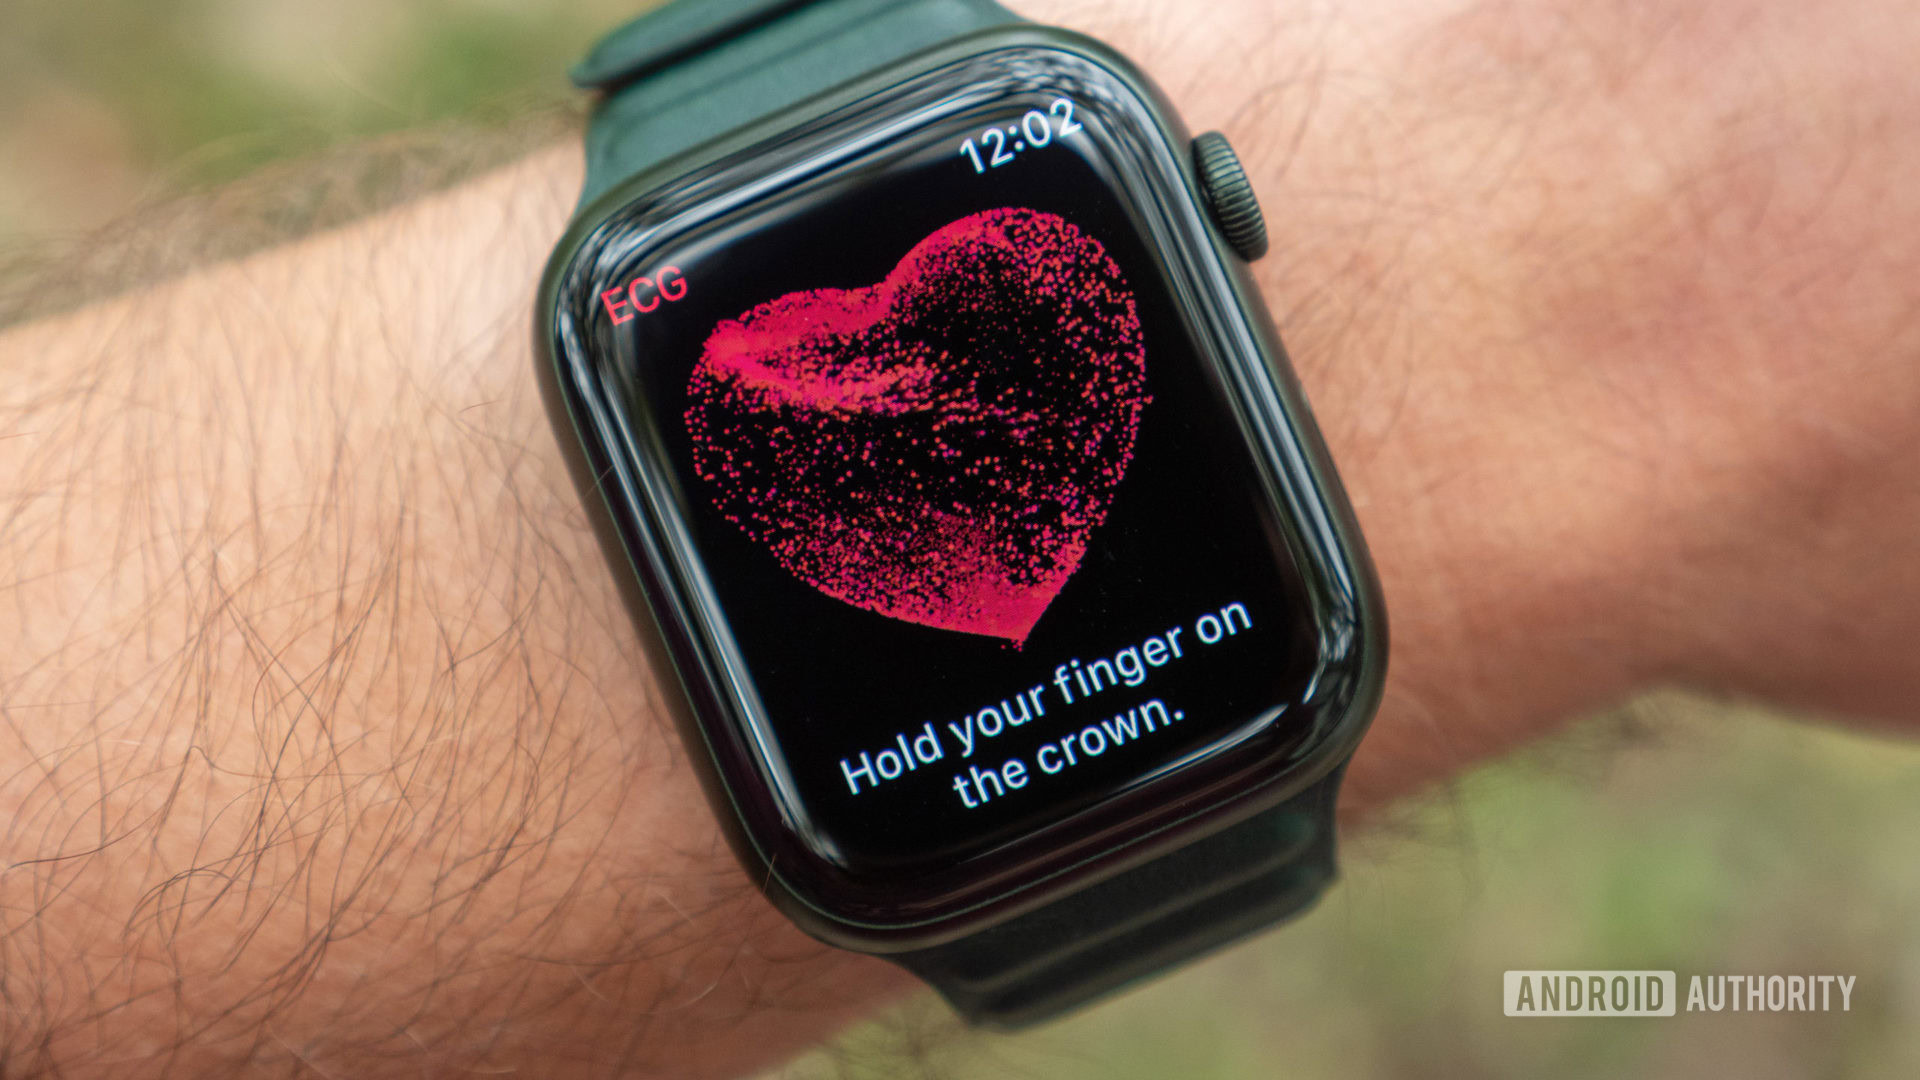 An image of the Apple Watch Series 7 on a wrist showing the ECG electrocardiogram app